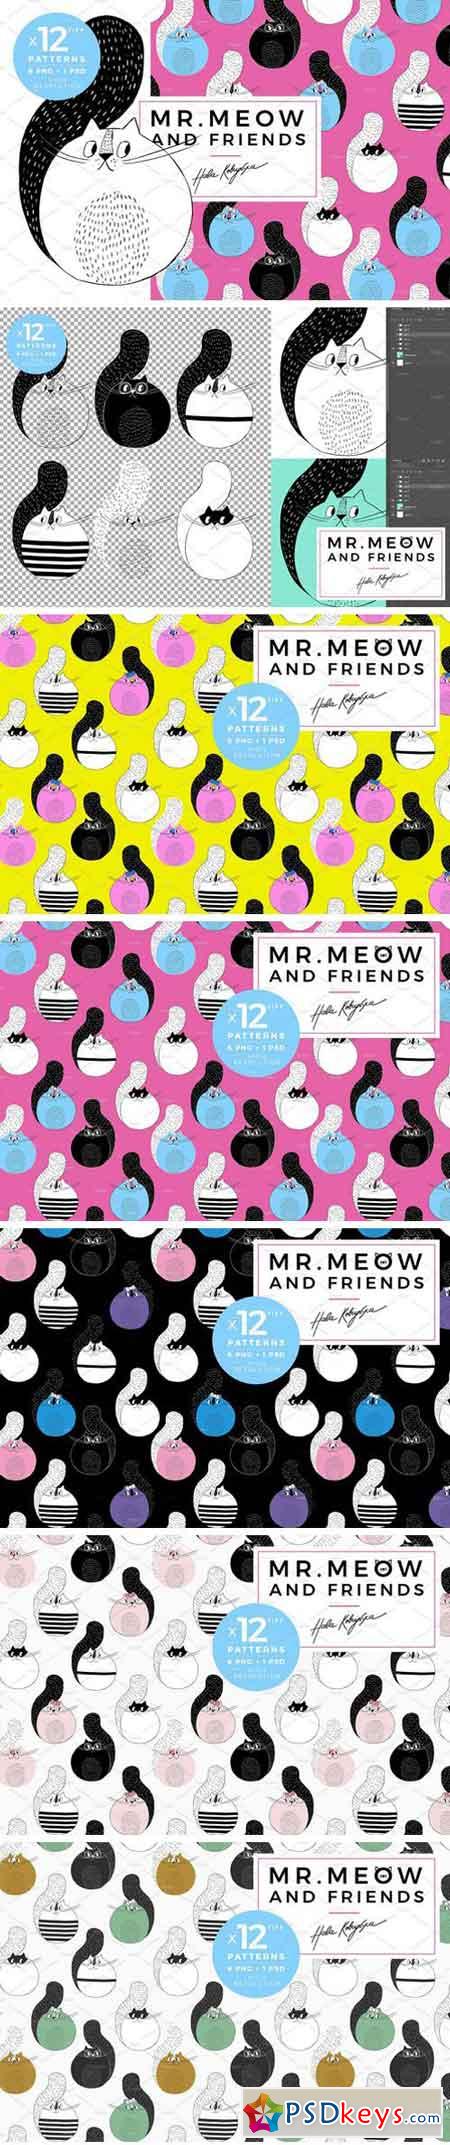 Mr.Meow & Friends pattern with cats 2121827